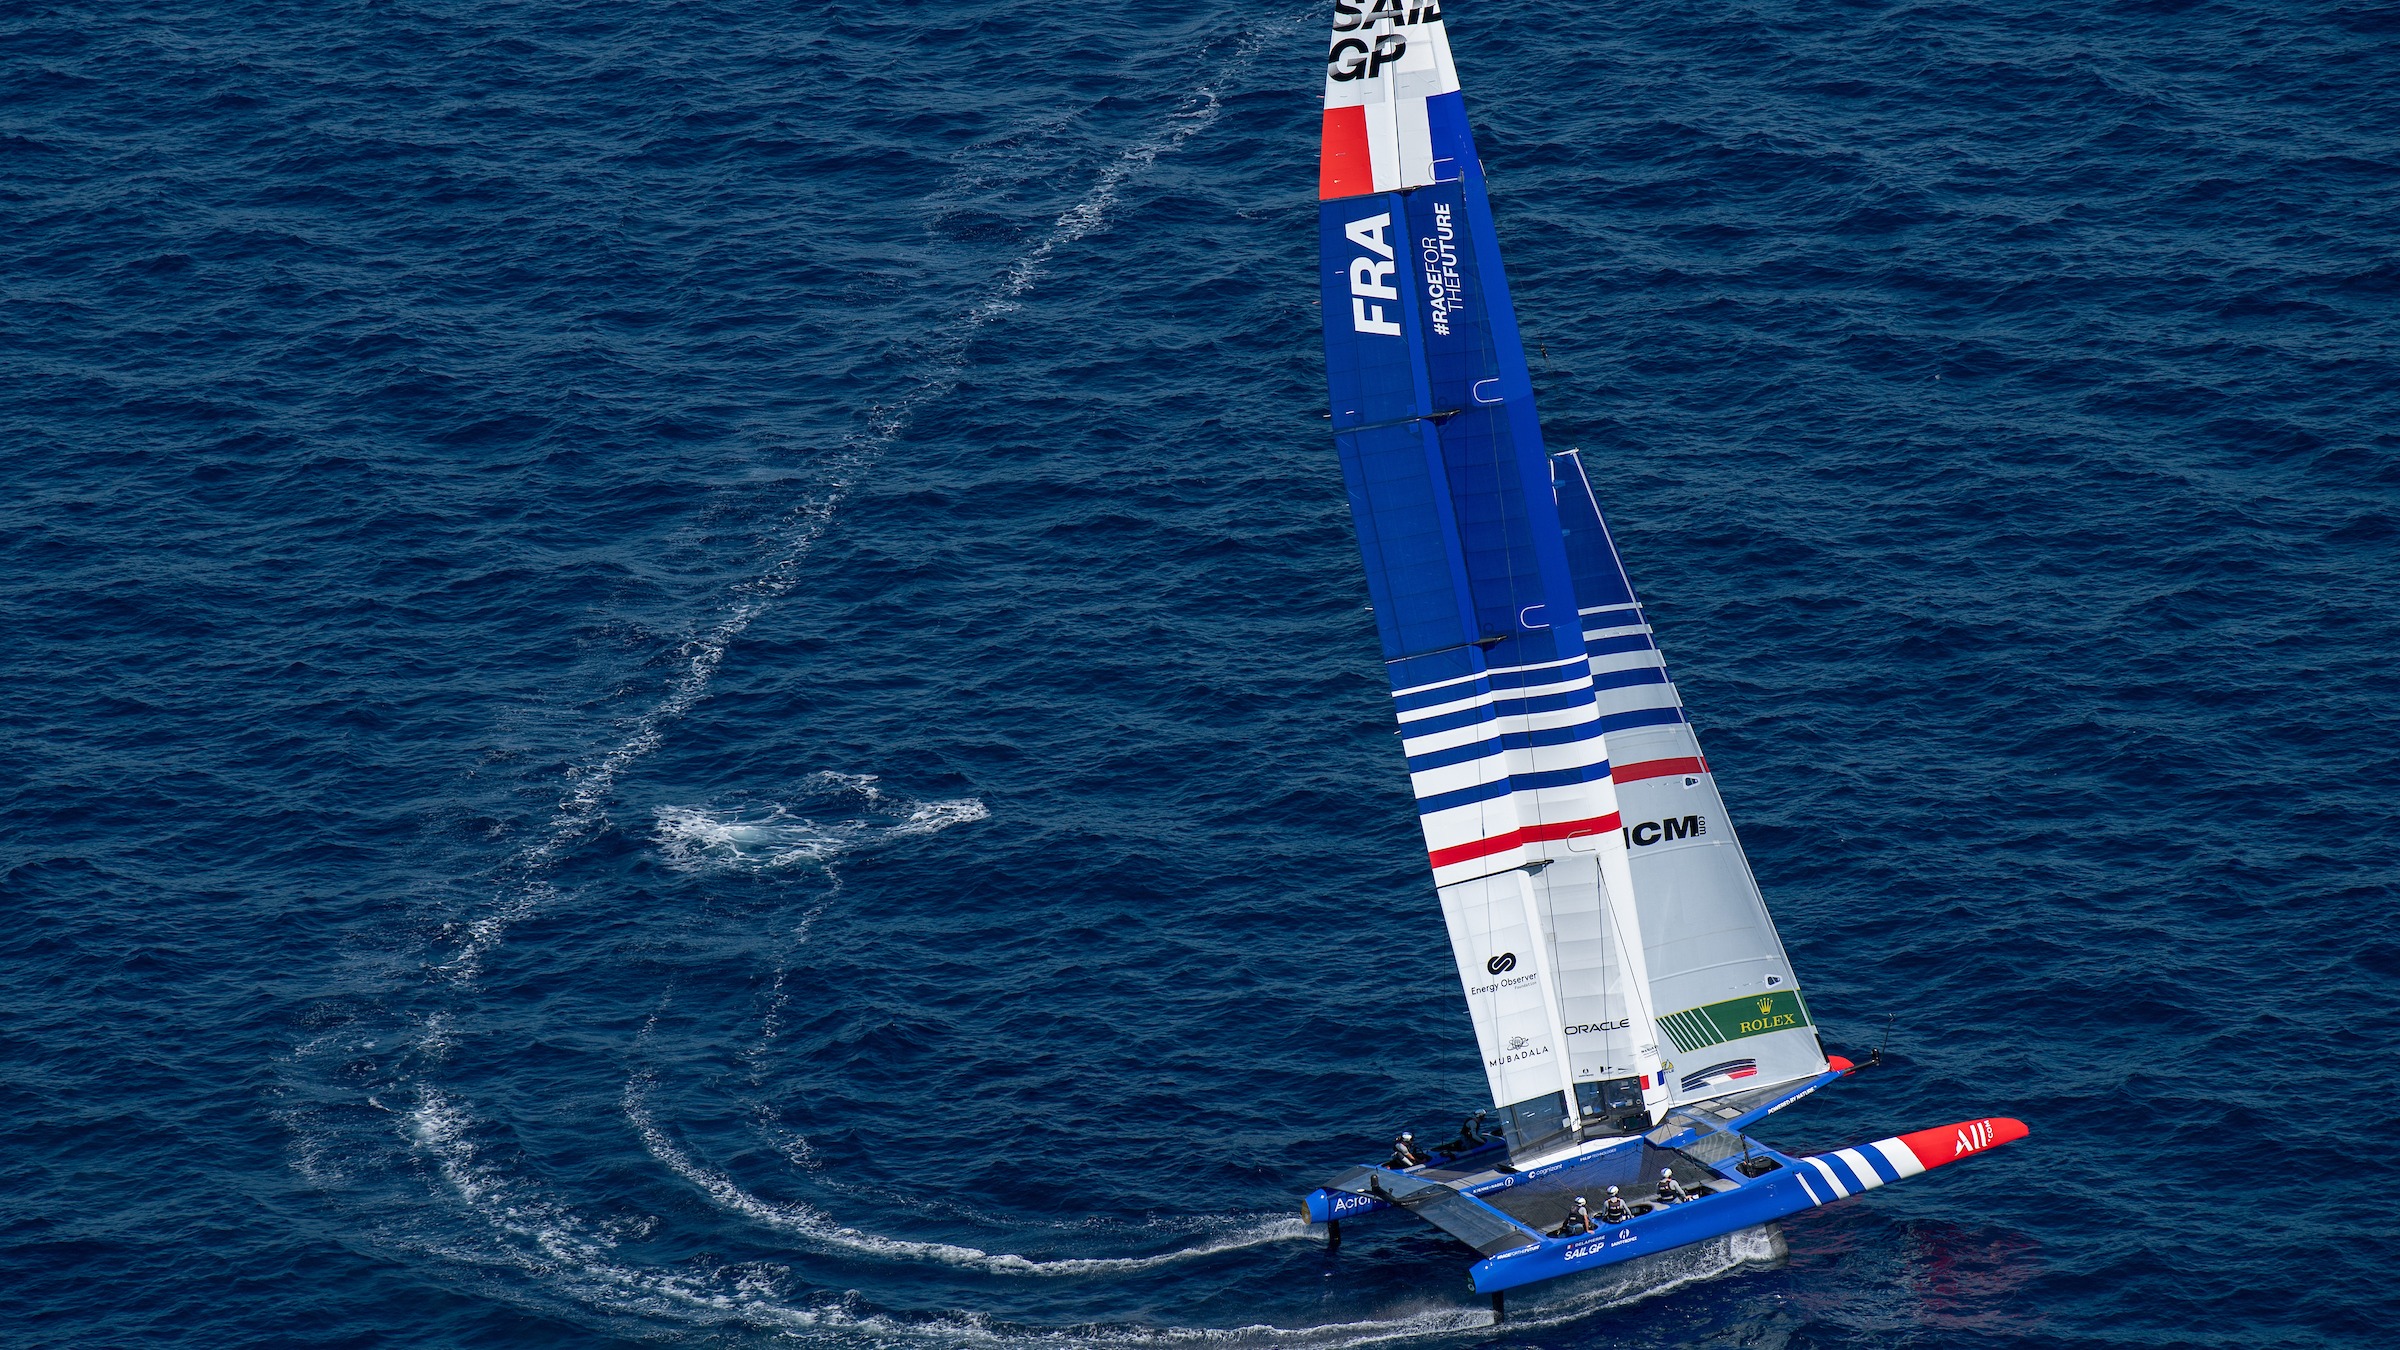 Season 4 // France turns on race day 1 of the France Sail Grand Prix 